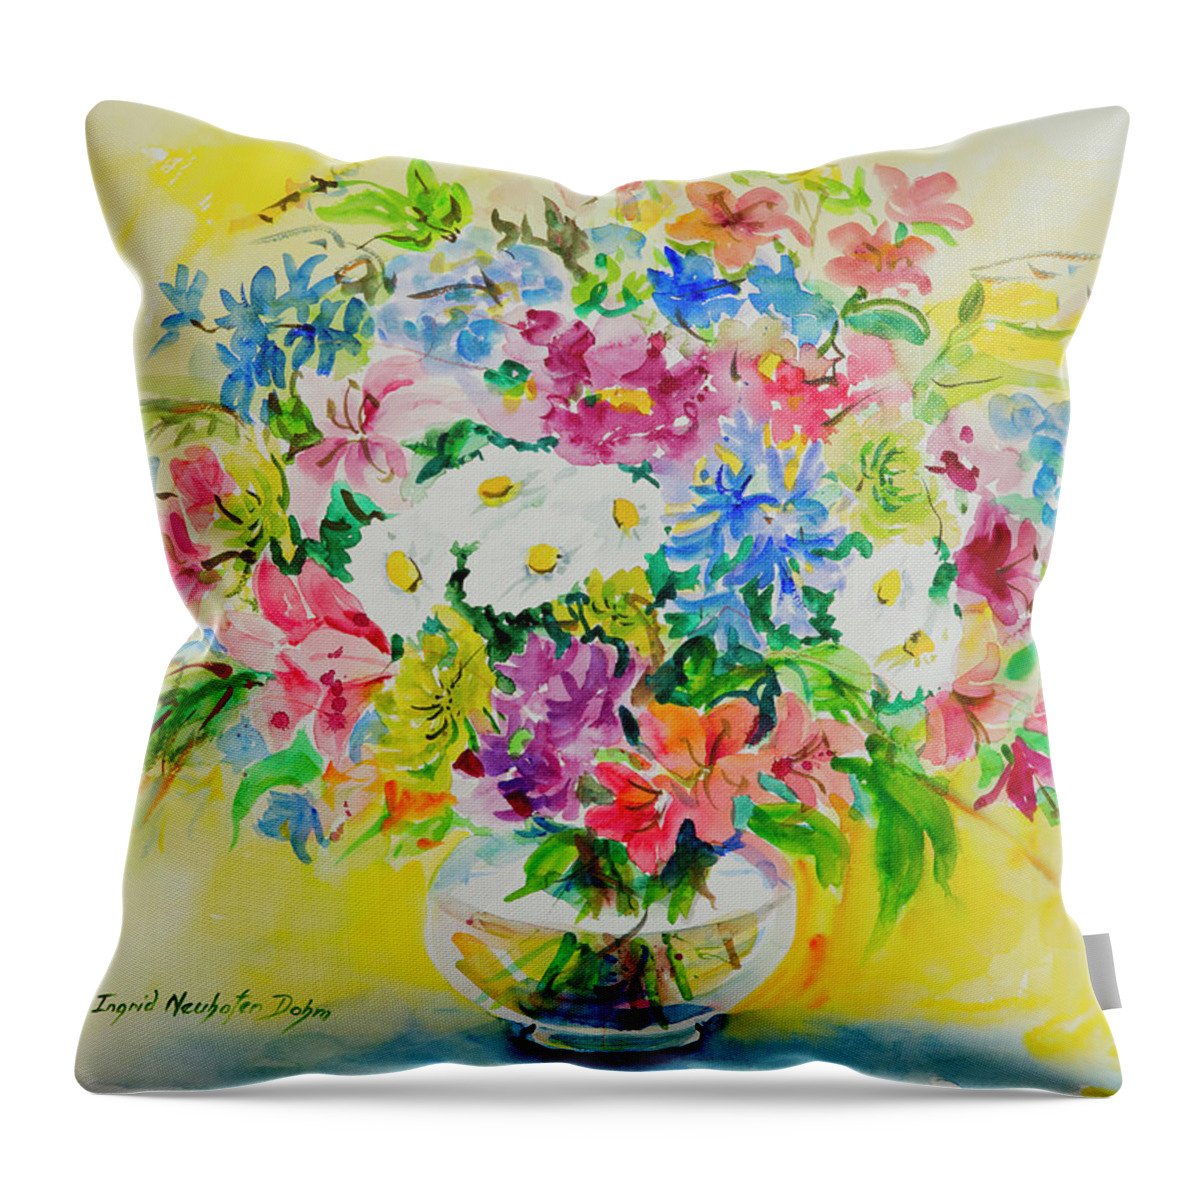 Flowers Throw Pillow featuring the painting Watercolor Series 188 by Ingrid Dohm